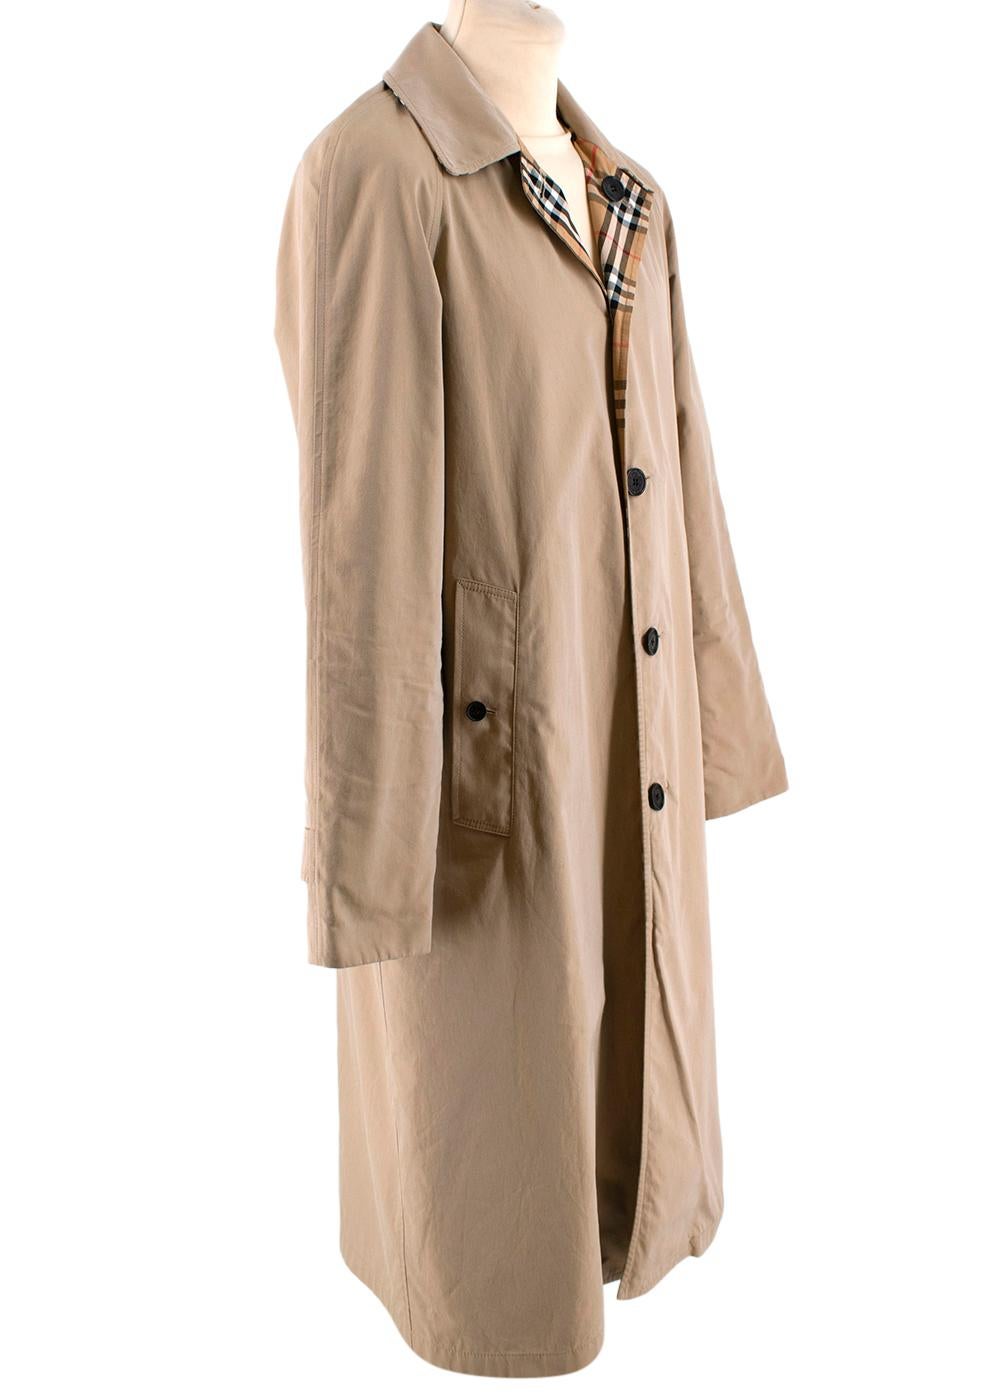 Burberry Beige & Vintage Check Reversible Trench Coat  

- Made of soft cotton 
- Classic cut 
- Reversible 
- Beige neutral hue
- Iconic signature checkered pattern 
- Pockets to the front 
- Button fastening to the front
- Timeless versatile